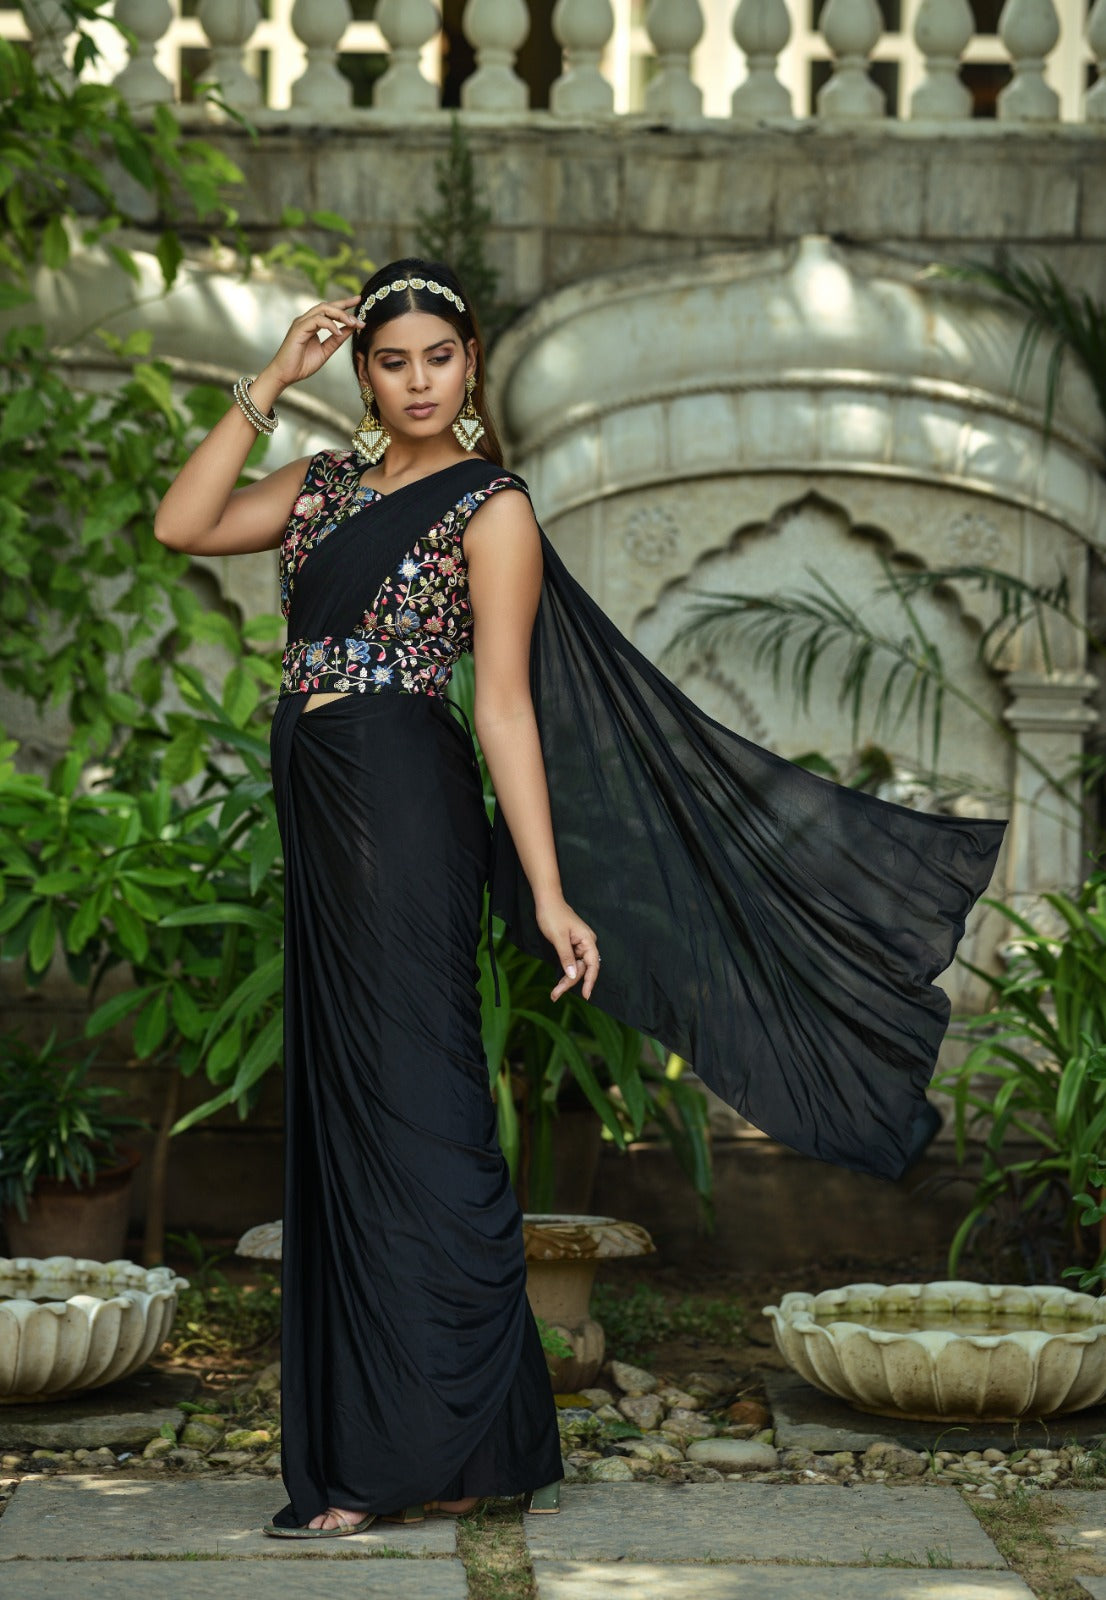 Gorgeous Black Color Ready To Wear Saree With Waist Belt